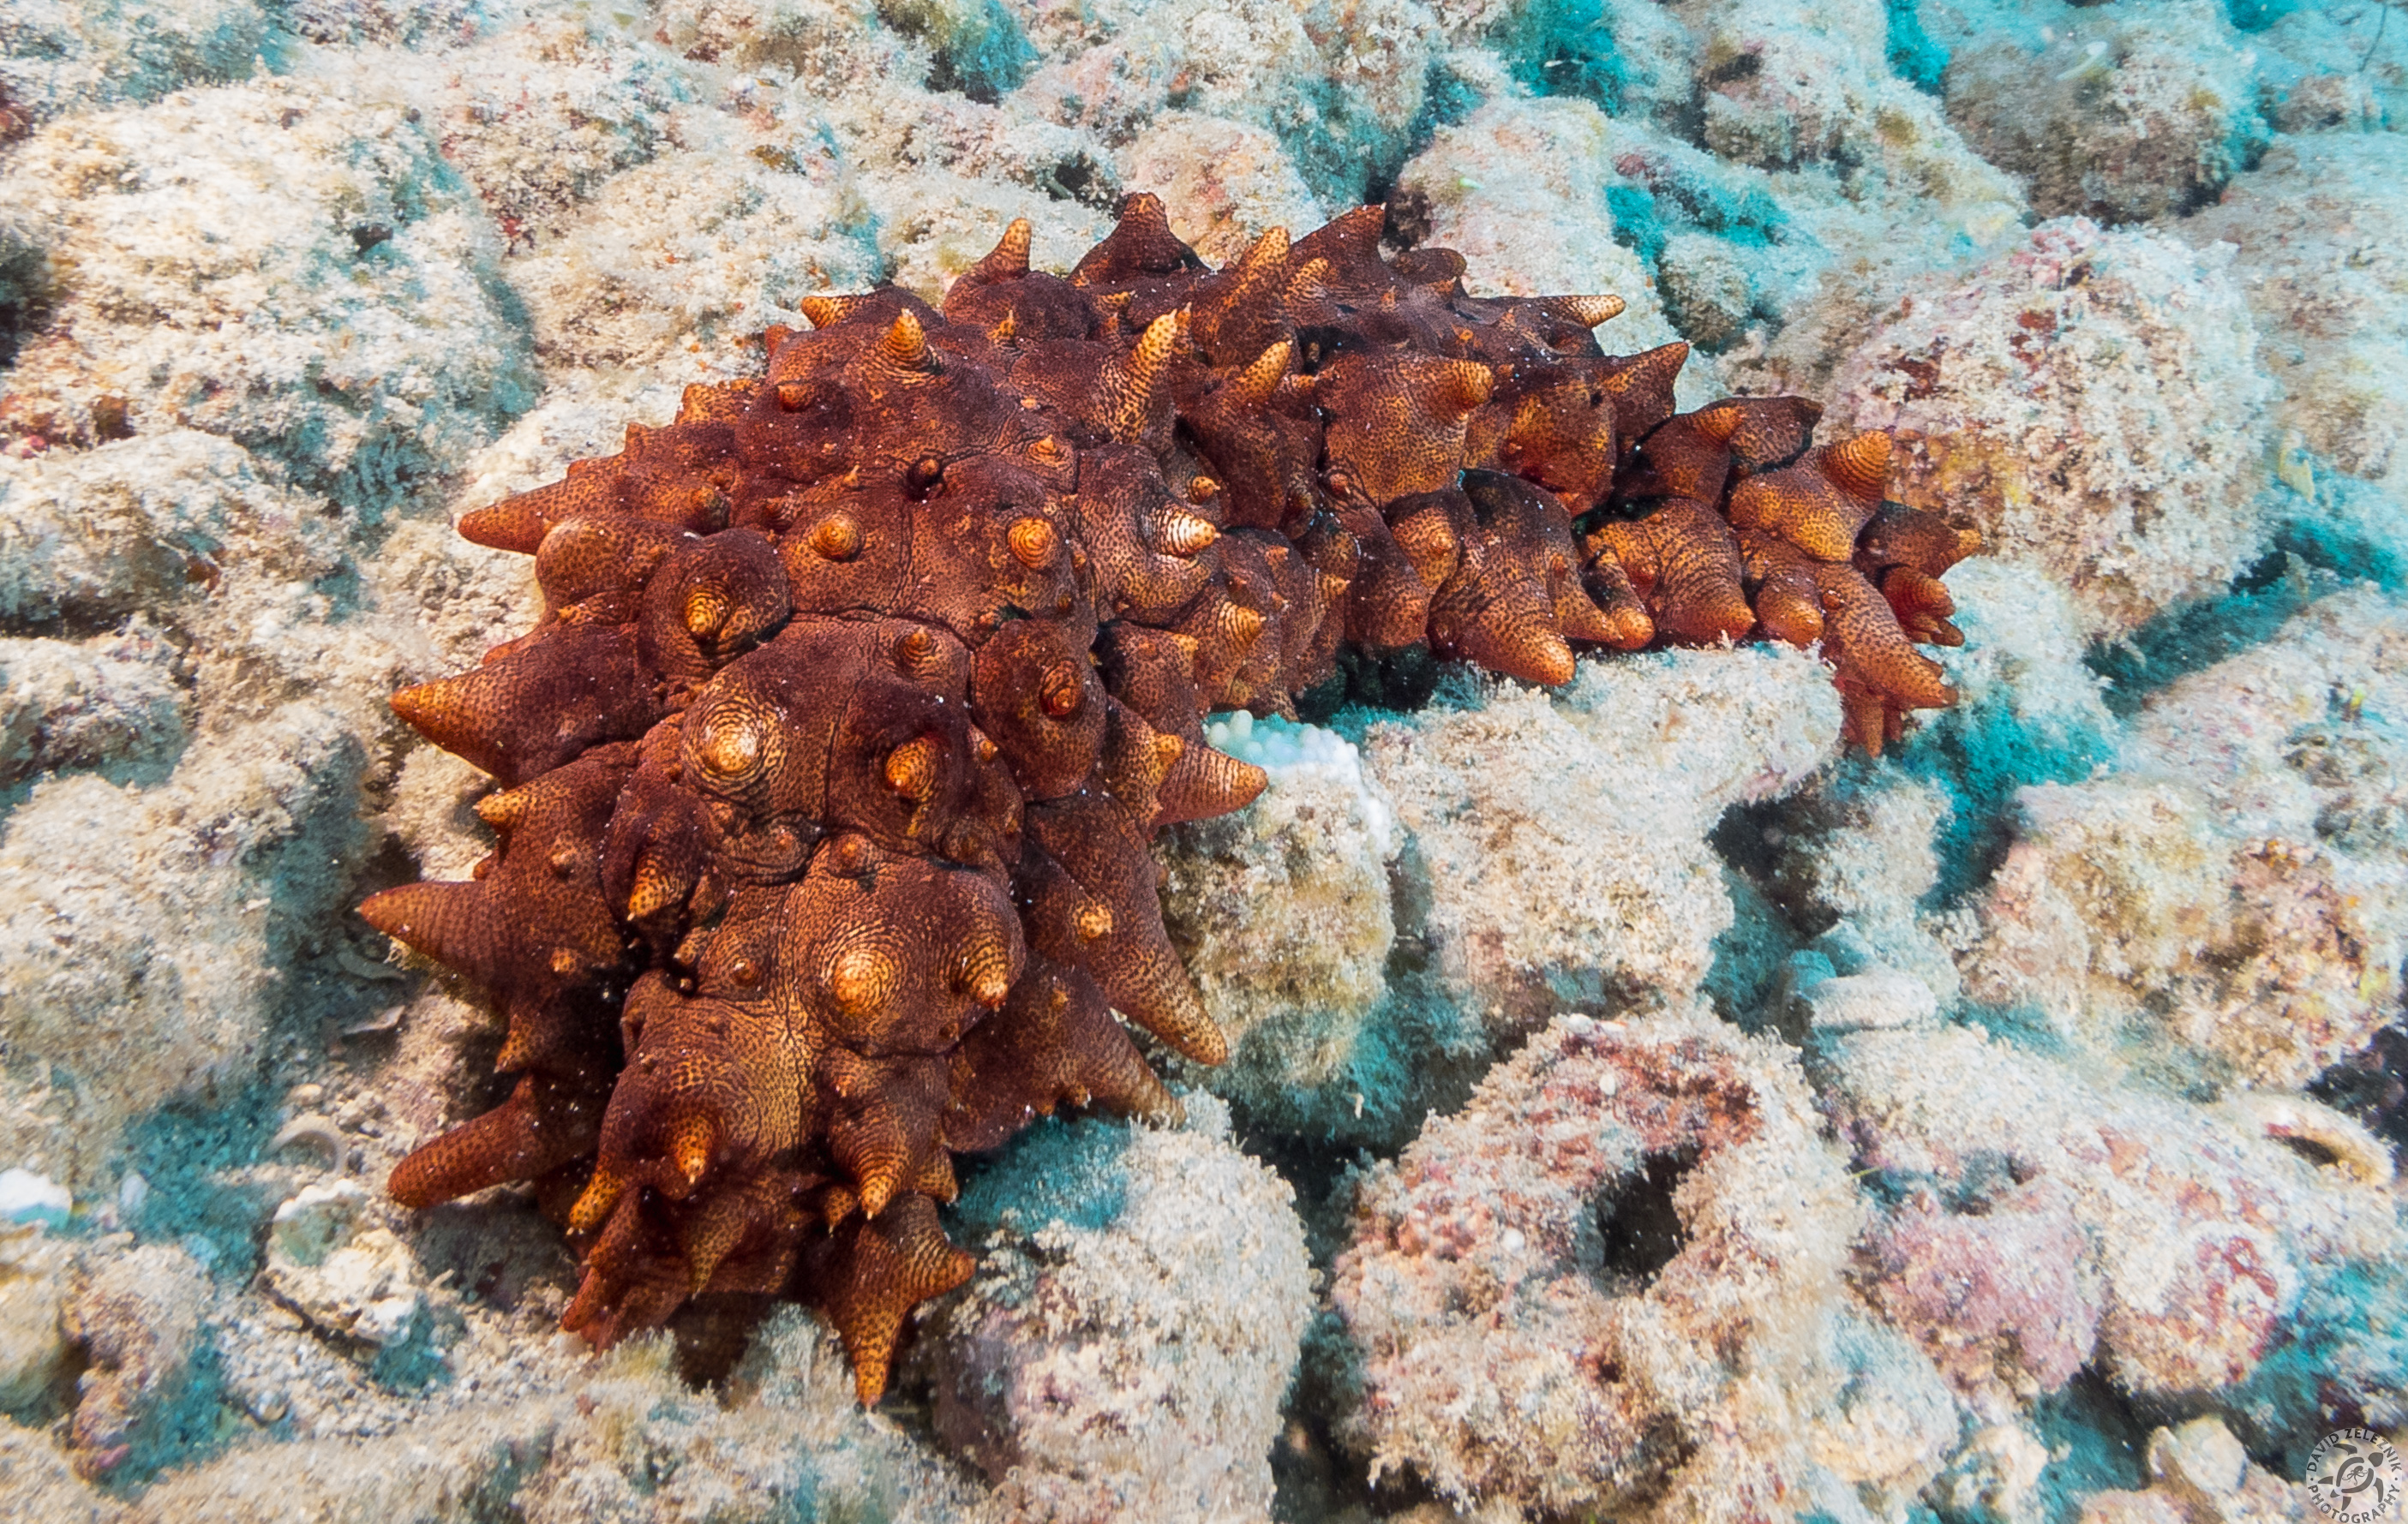 Most sea cucumbers are pretty unremarkable, but this one was the gnarliest I'd ever seen. Having no clue and no ID books with me, I had to wait until I got home to look it up. Final verdict is that it's the appropriately named Hawaiian Spiky Sea Cucumber. Go figure!